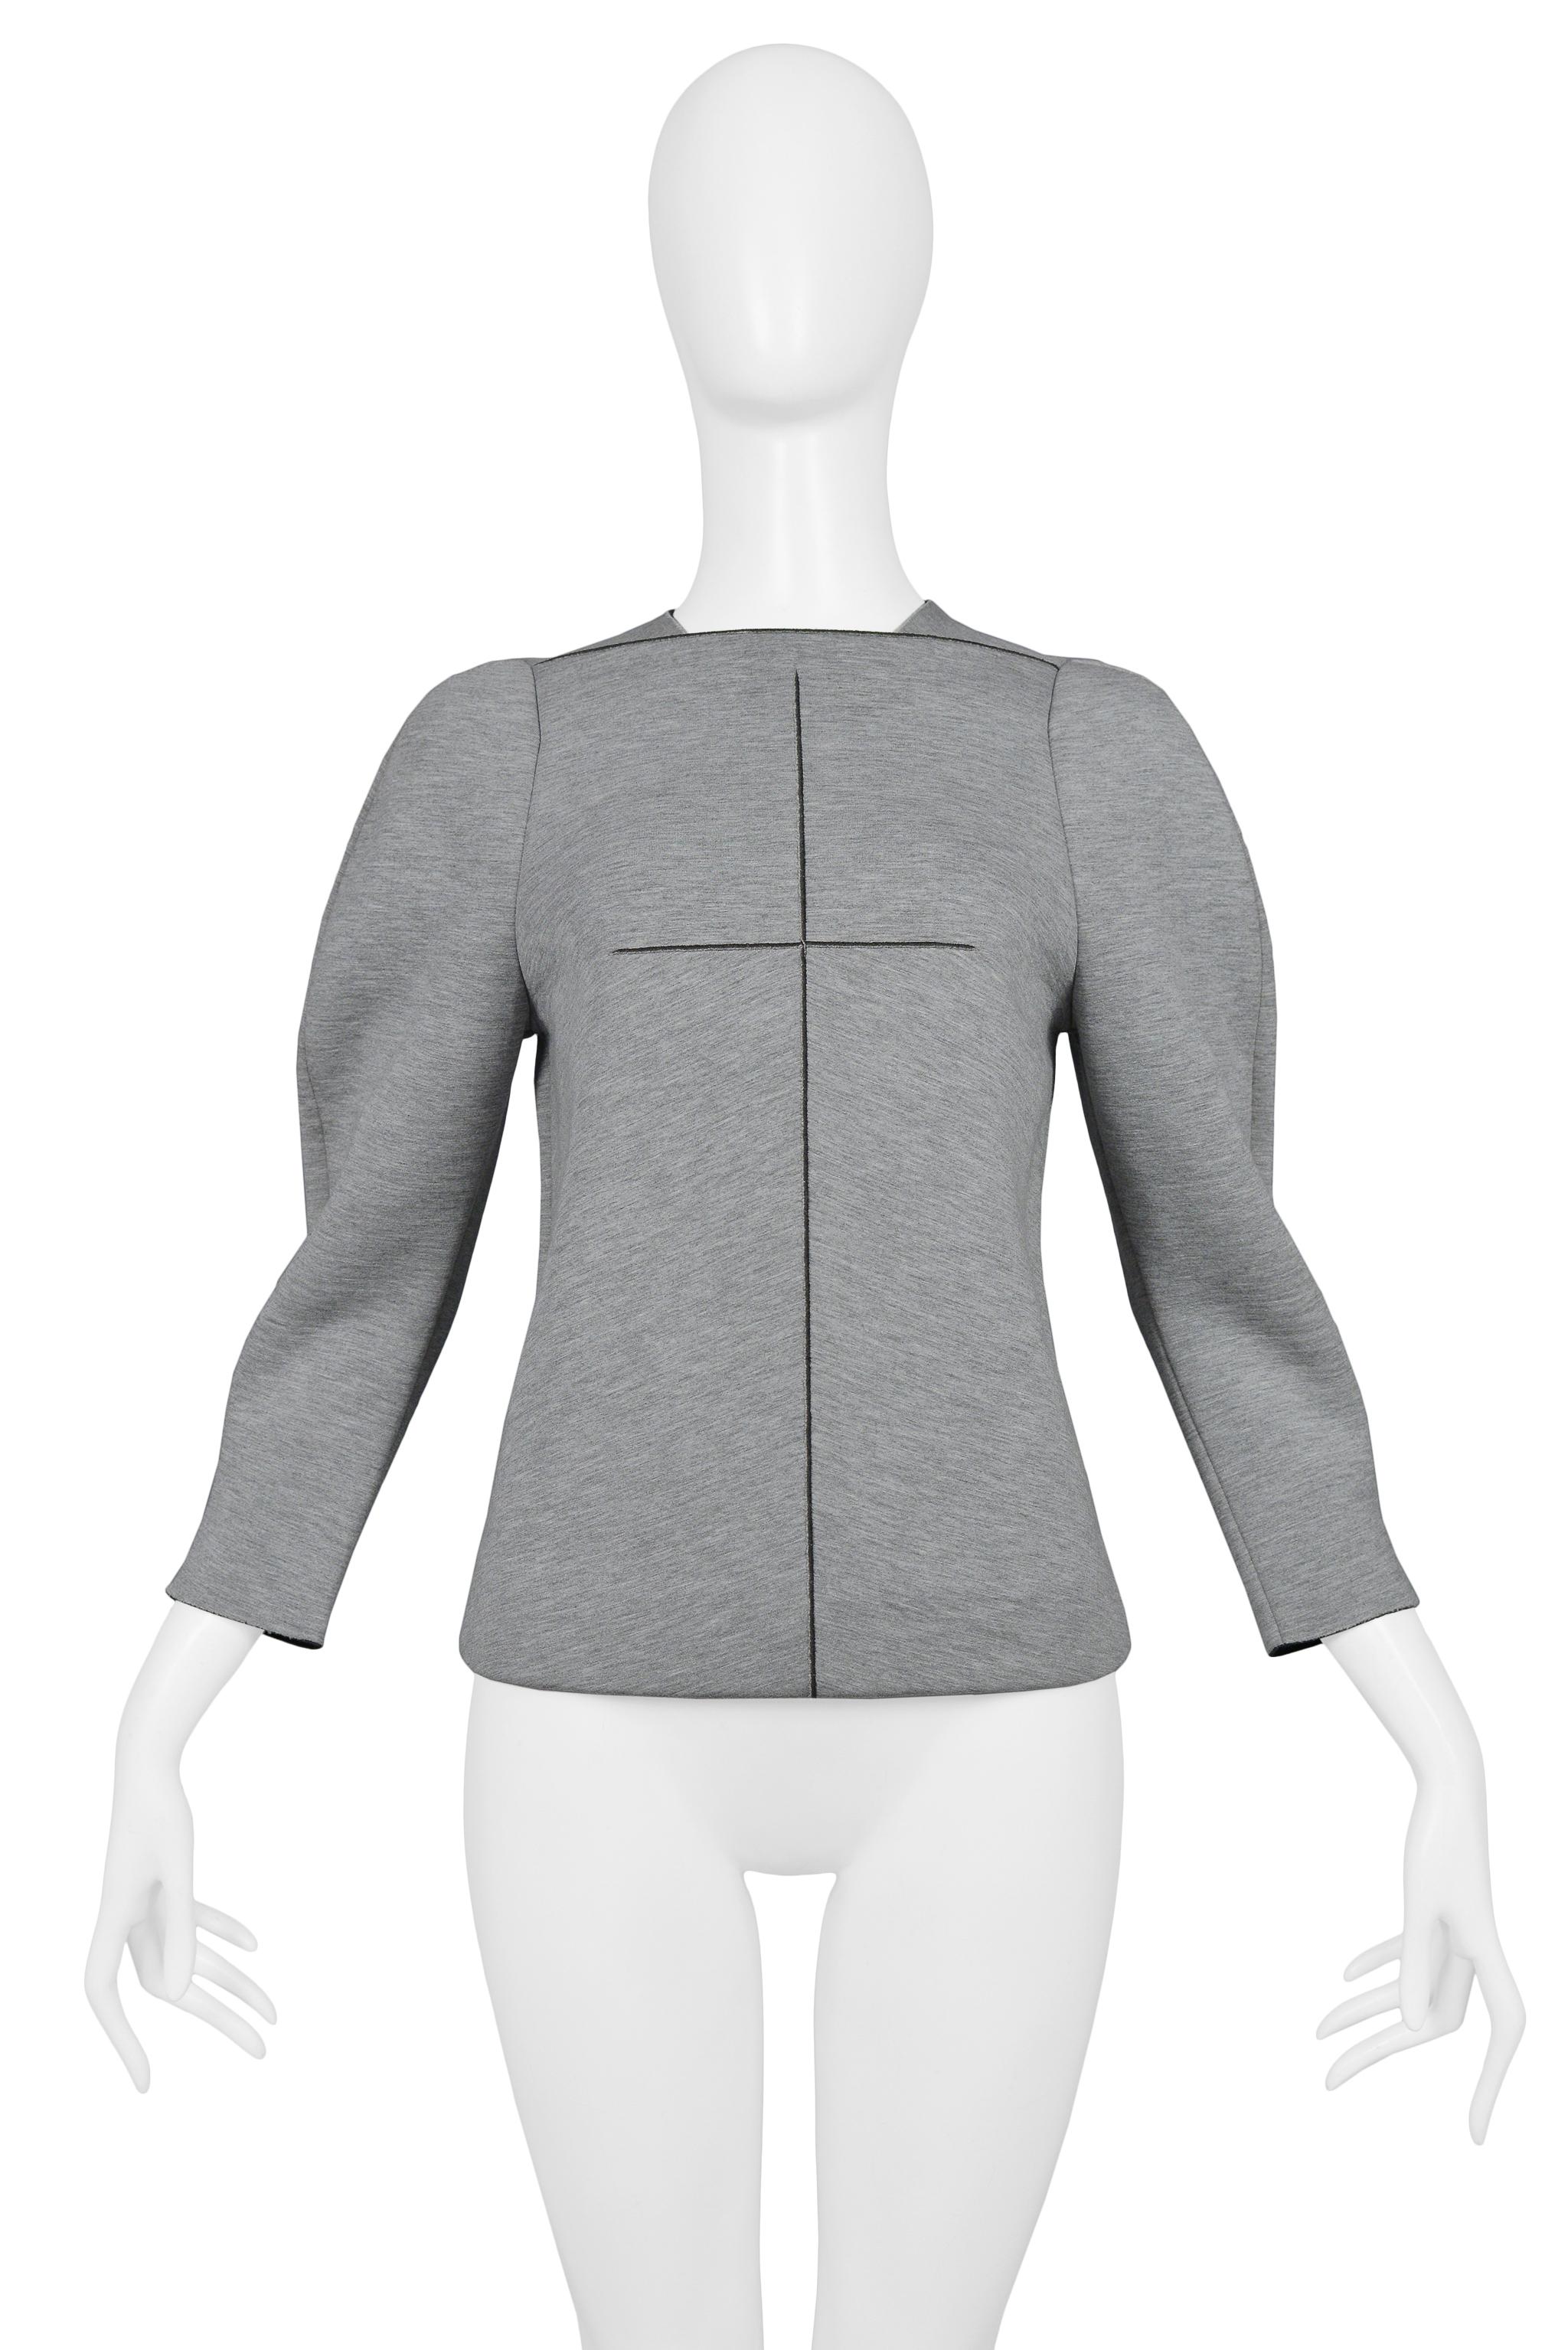 Resurrection Vintage is pleased to offer a vintage Balenciaga by Nicolas Ghesquiere grey neoprene top featuring 3/4 length sleeves, high neckline, cross seaming detail at the center front and back, and center back zipper. 

Balenciaga Paris
Designed